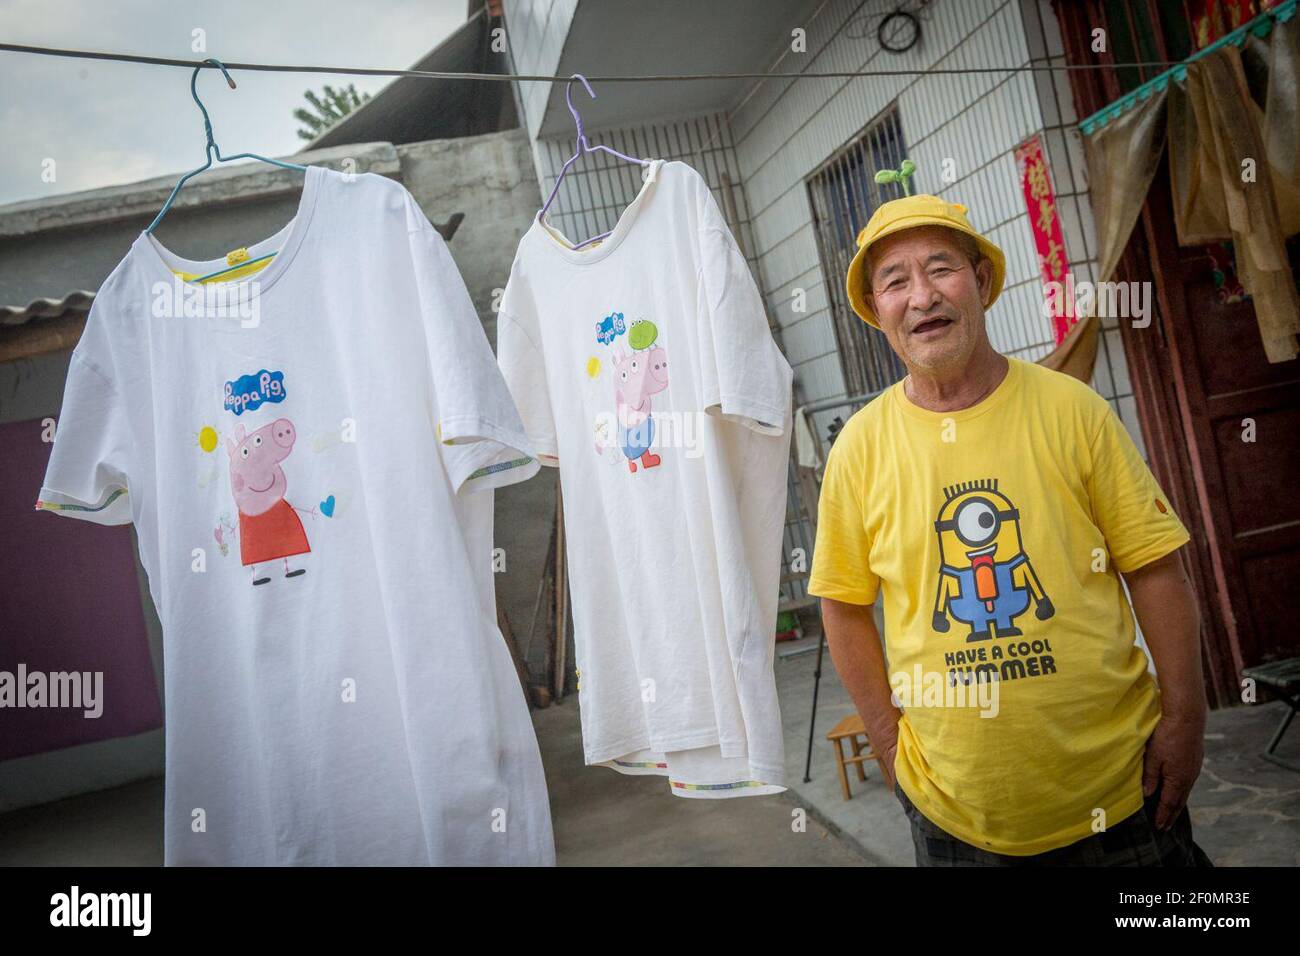 In this undated photo, Chinese elderly man Chao Yougeng diagnosed with depression wearing a hat, which sells well on Alibaba's e-commerce platform Taobao, poses for photos at home in Zhumadian city, central China's Henan province. An elderly man diagnosed with depression about 10 years ago has been winning hearts online over the past two years thanks to short videos filmed by his granddaughter. The man Chao Yougeng from Zhumadian city in central China's Henan province received treatment in hospital for depression and relied afterwards on antidepressant drugs. His granddaughter posted first vid Stock Photo